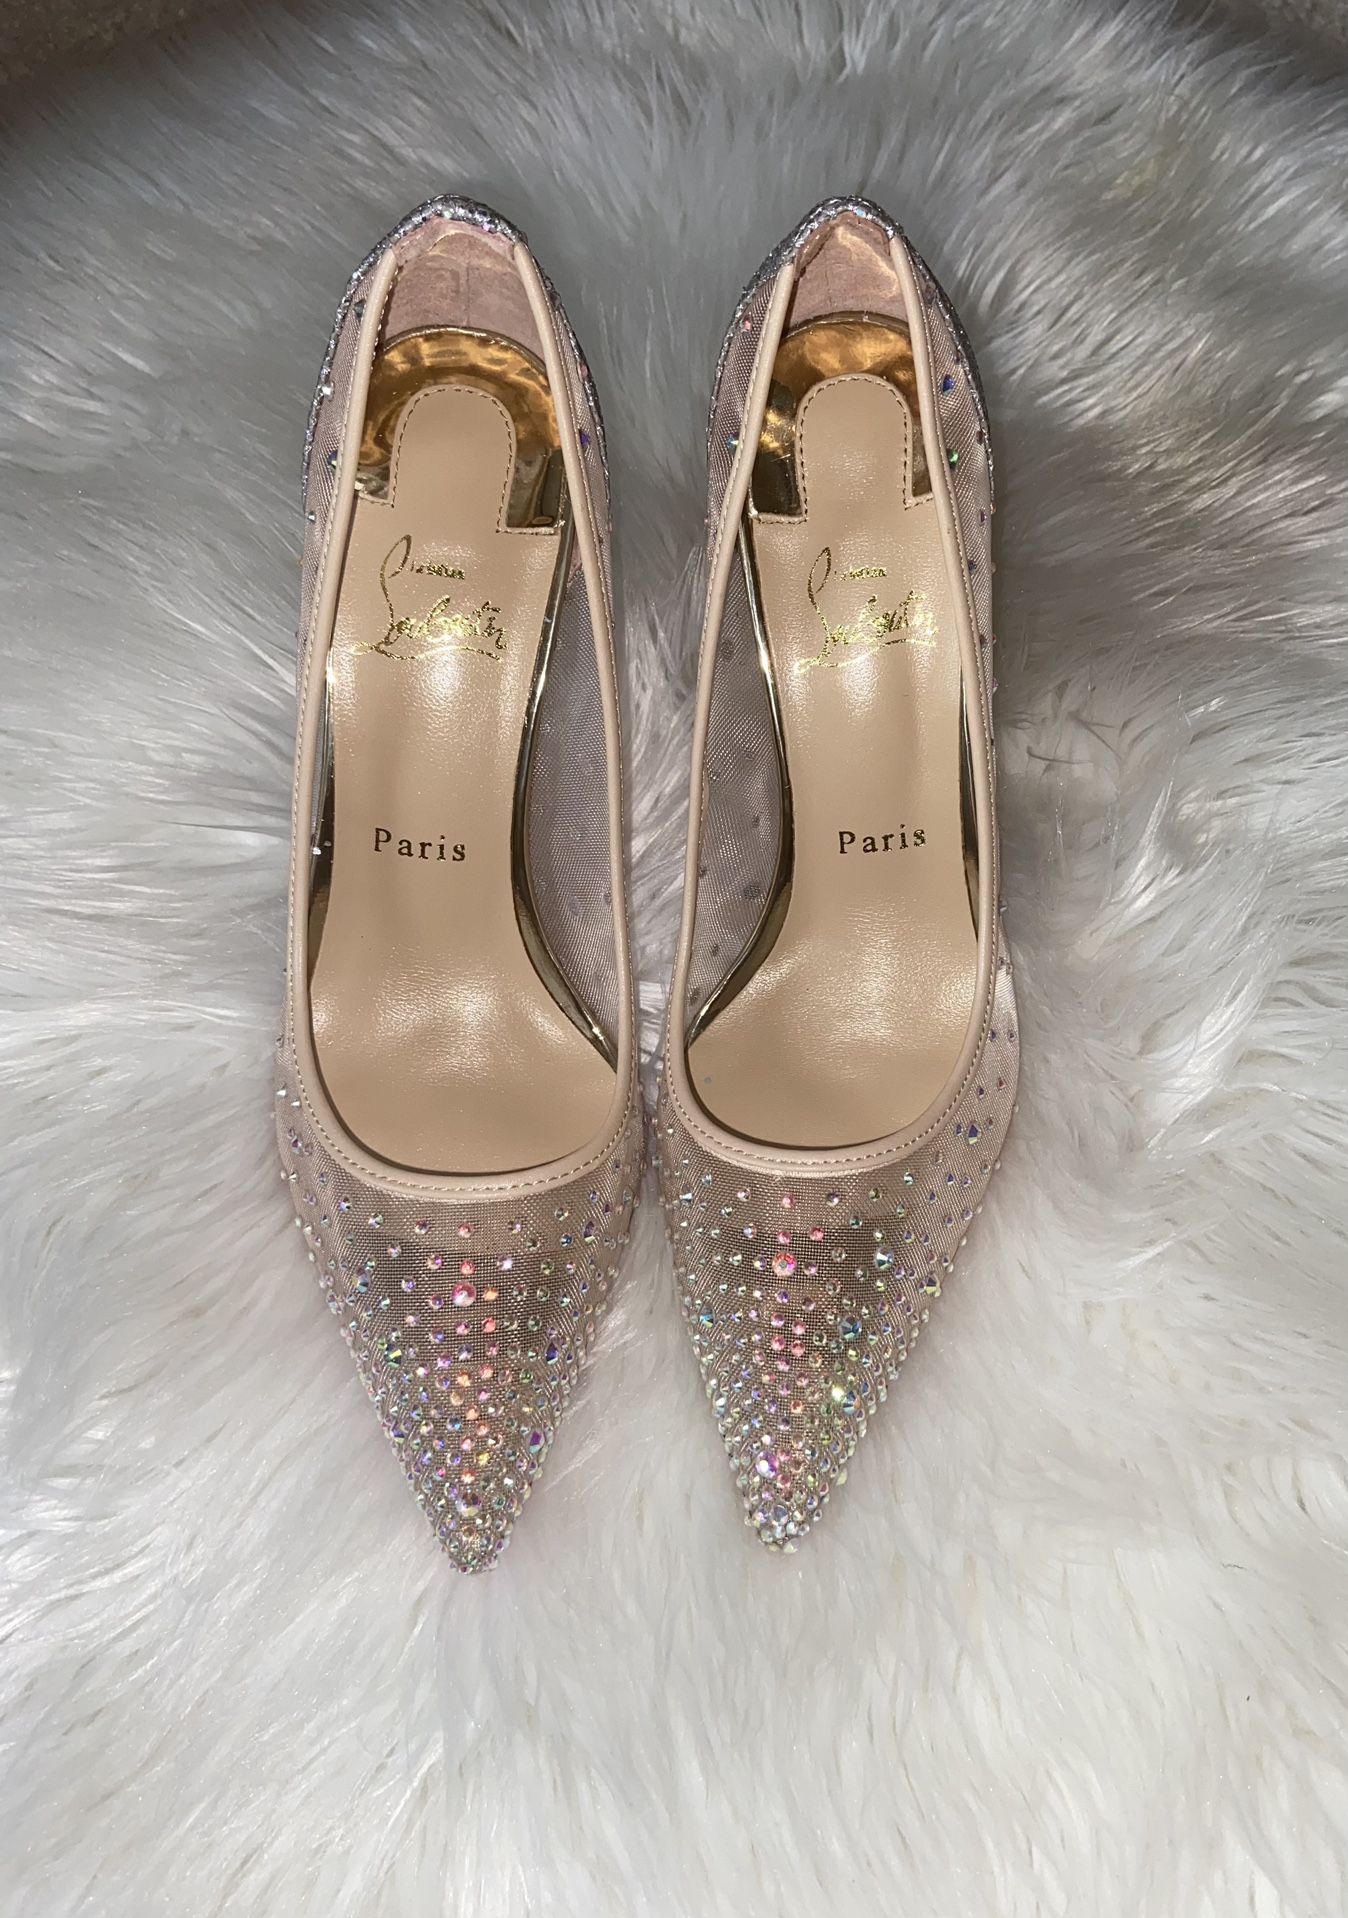 Brand New Beige Christian louboutin Shoes Size 9 Adored With Iridescent Crystal Stones 